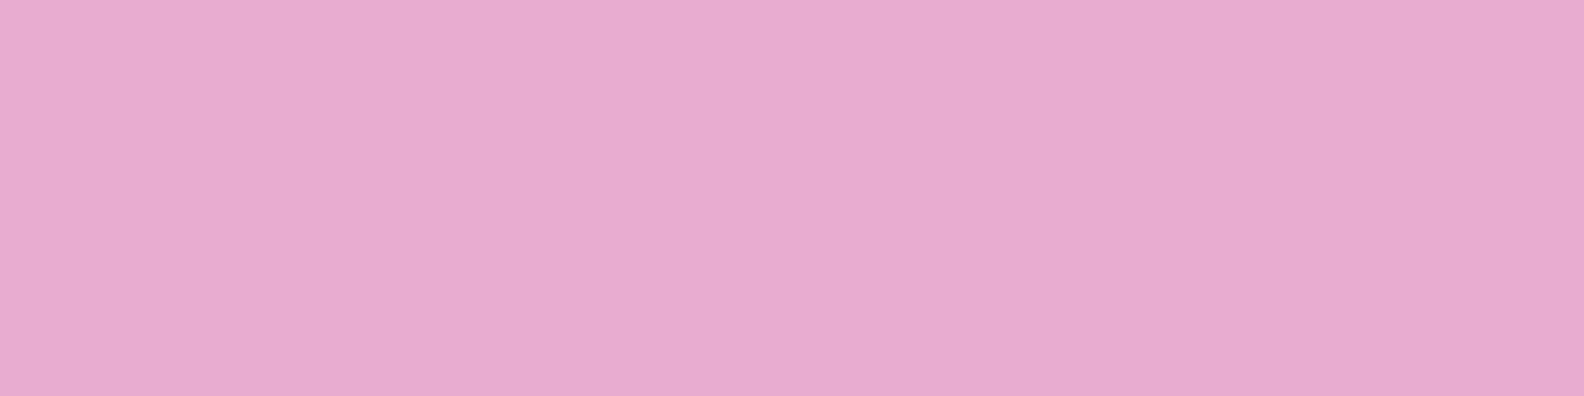 1584x396 Pink Pearl Solid Color Background